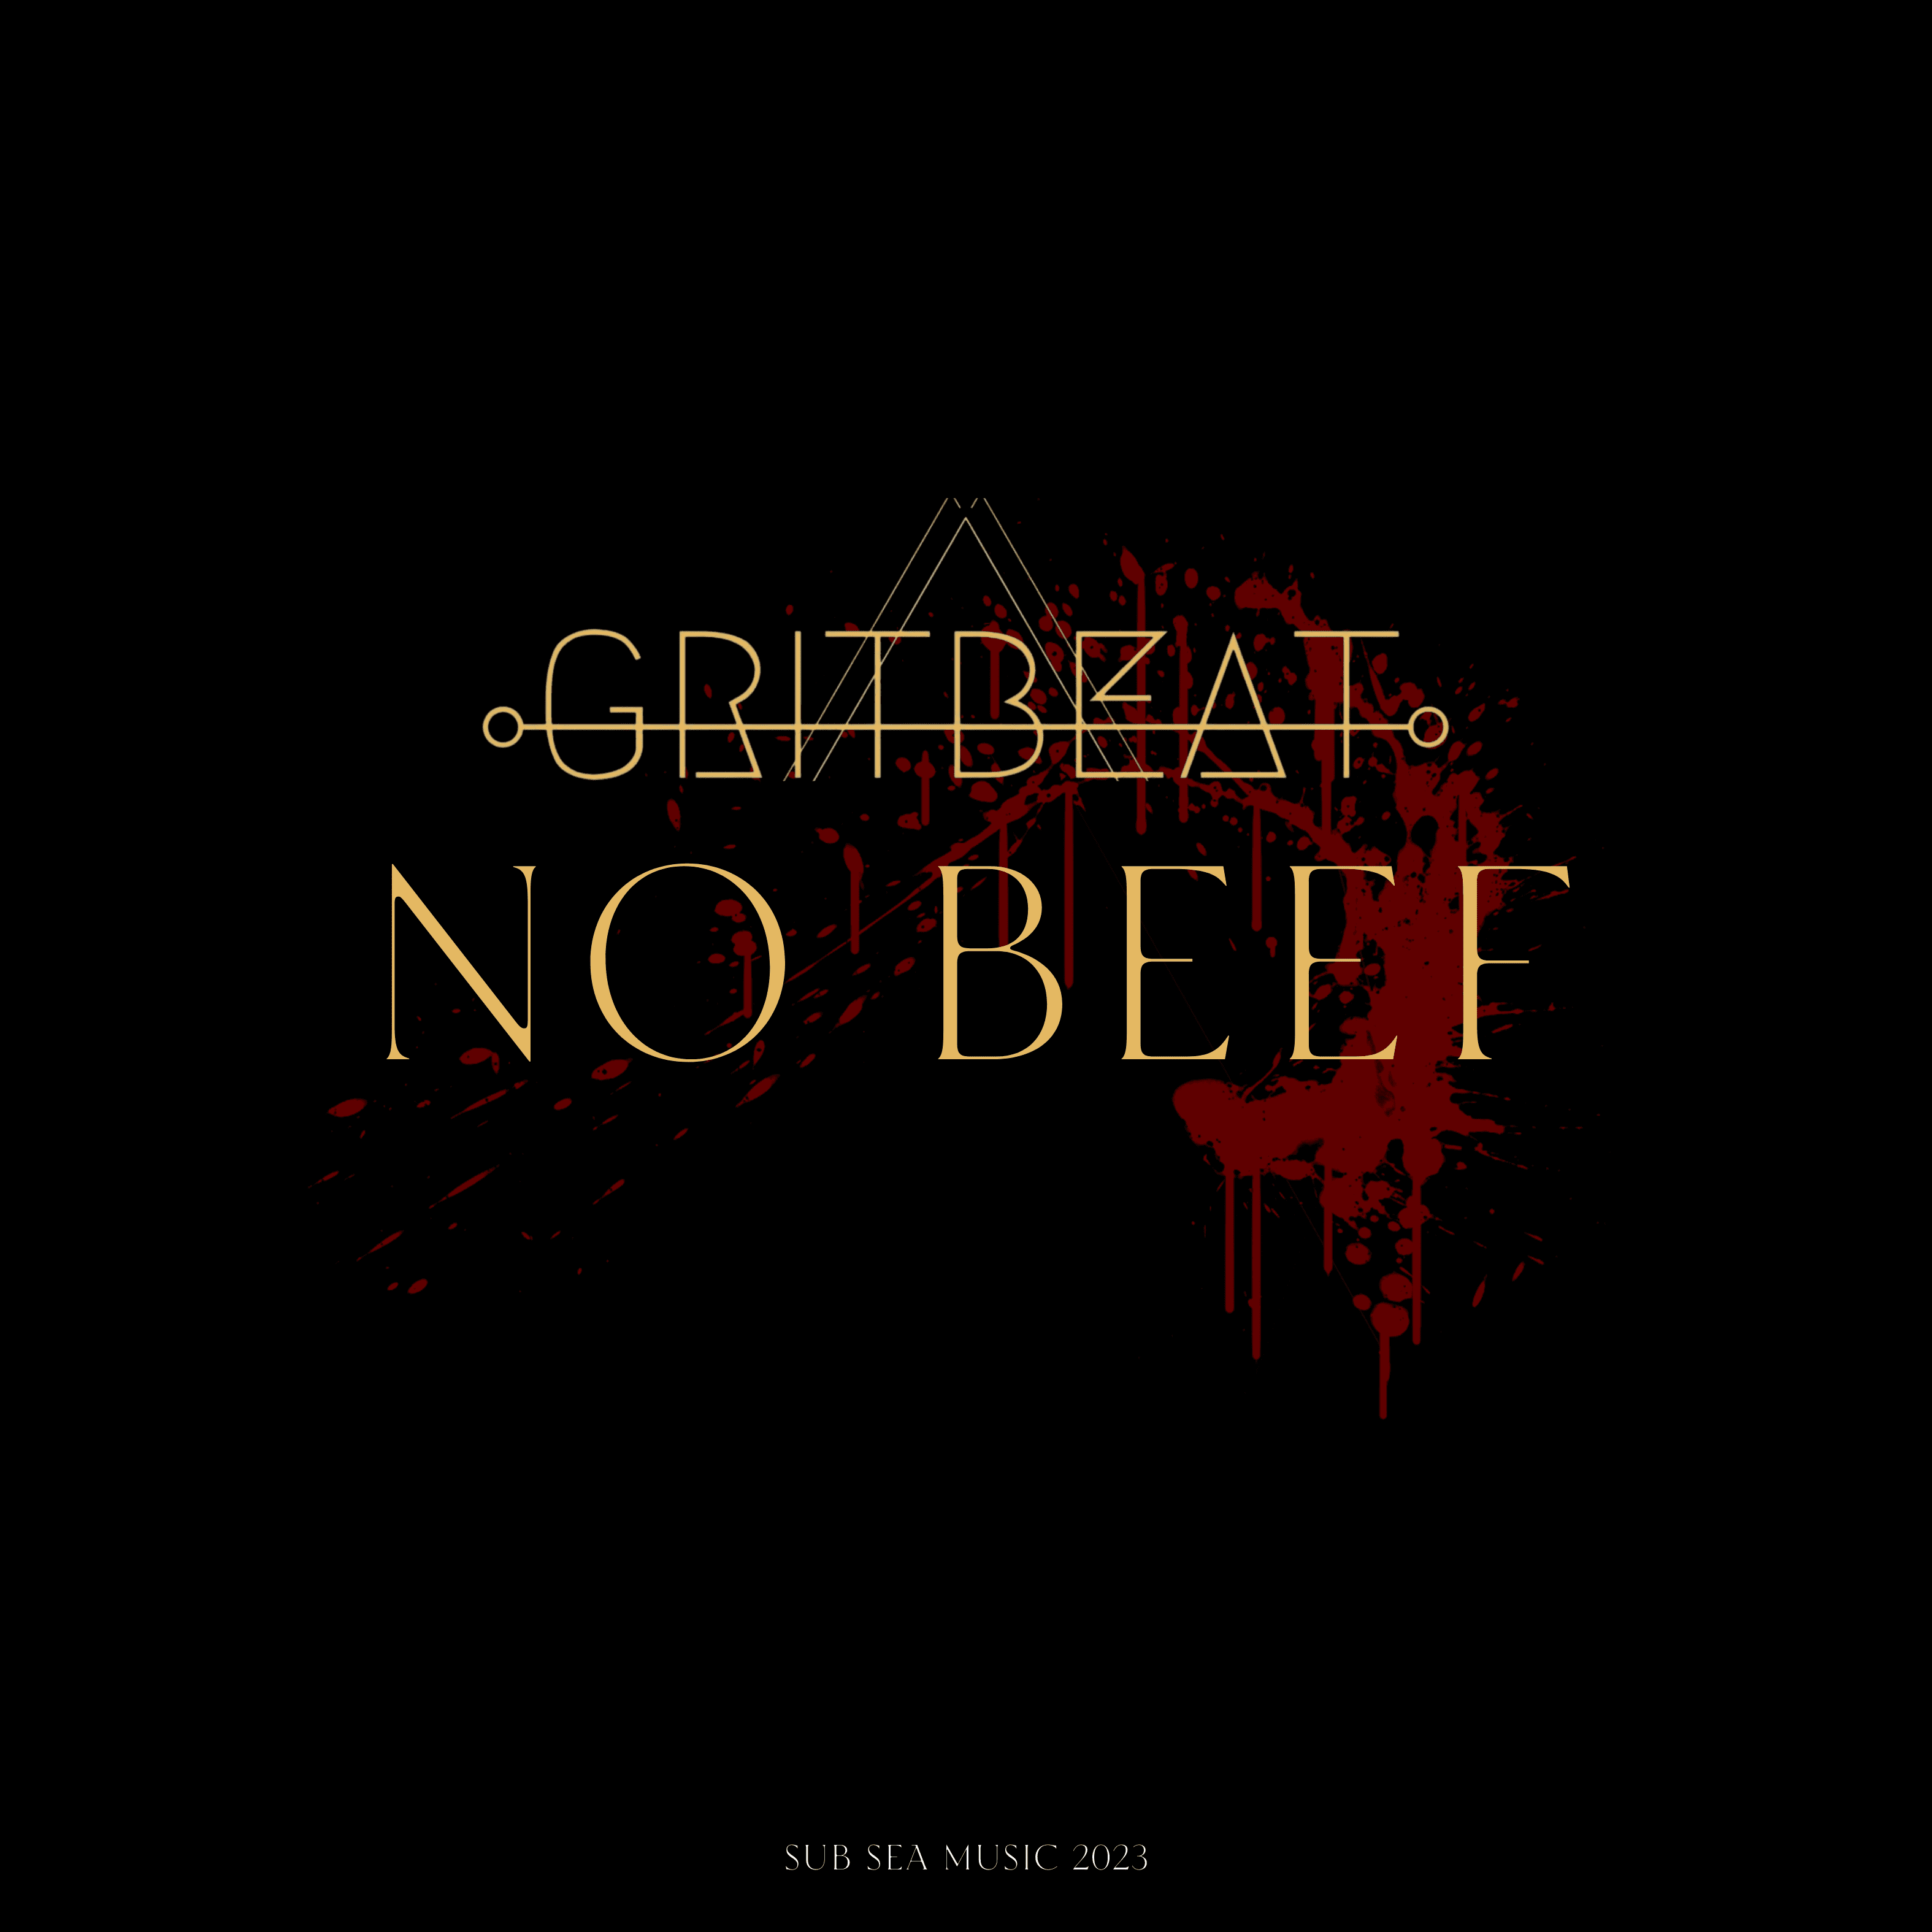 Cover art for GritBeat's song: NO BEEF